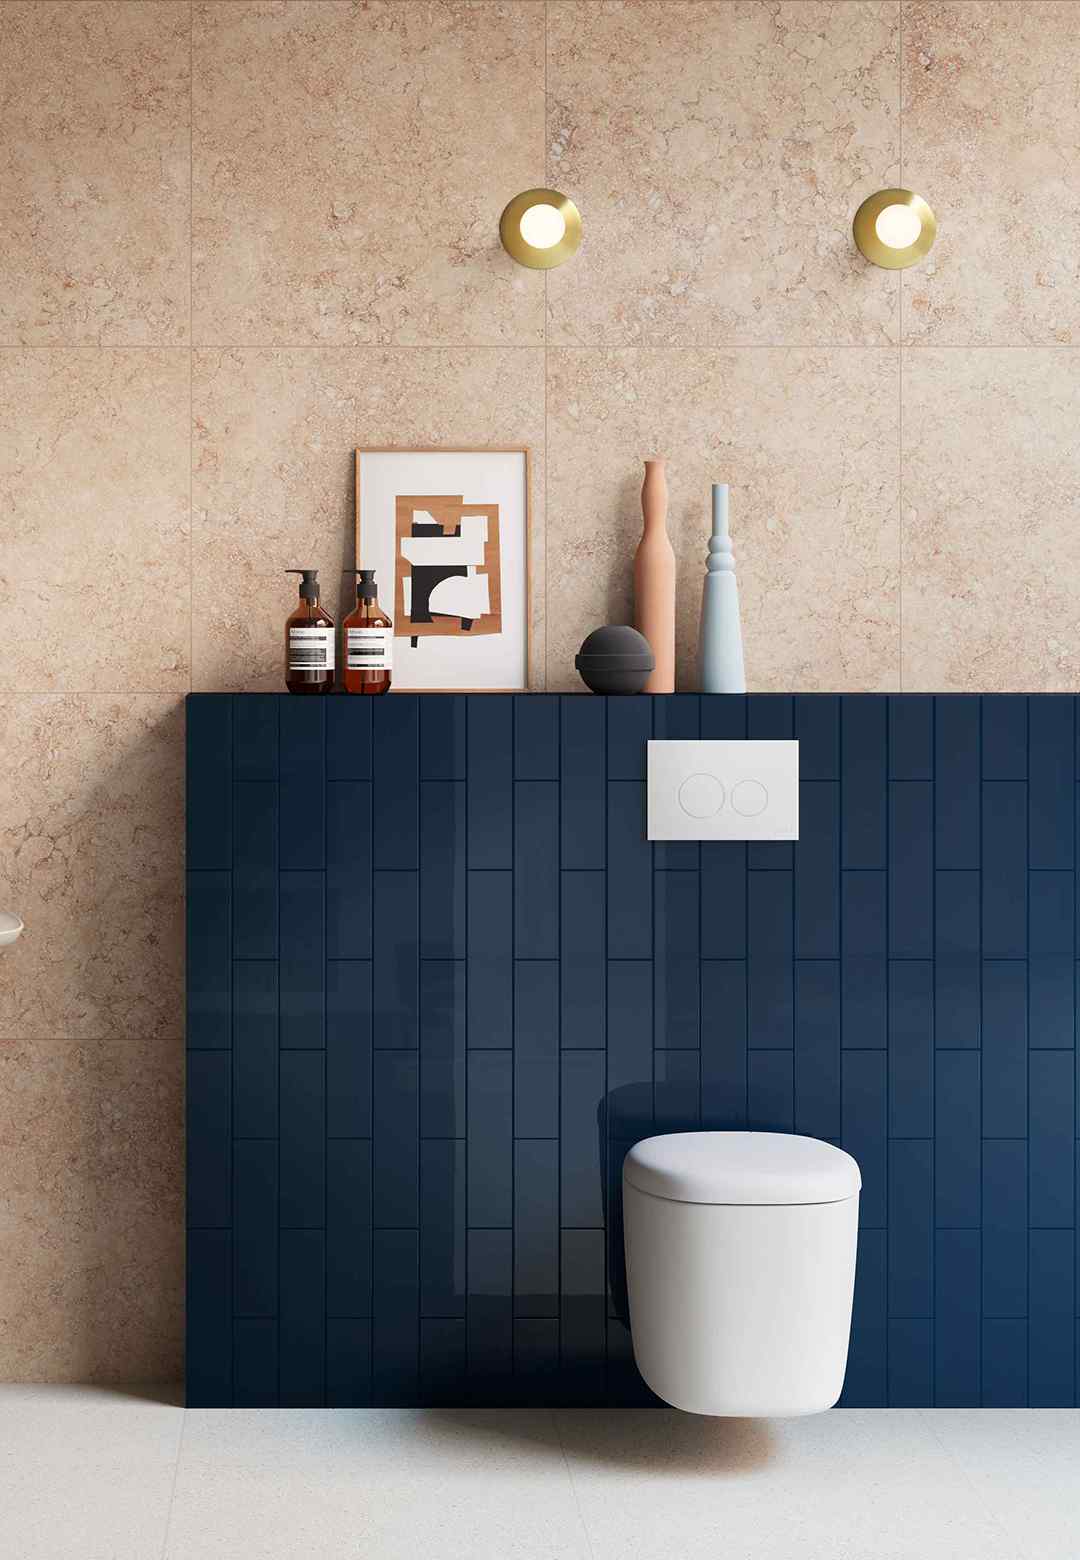 Explore VitrA’s new tile collections at Cersaie 2021